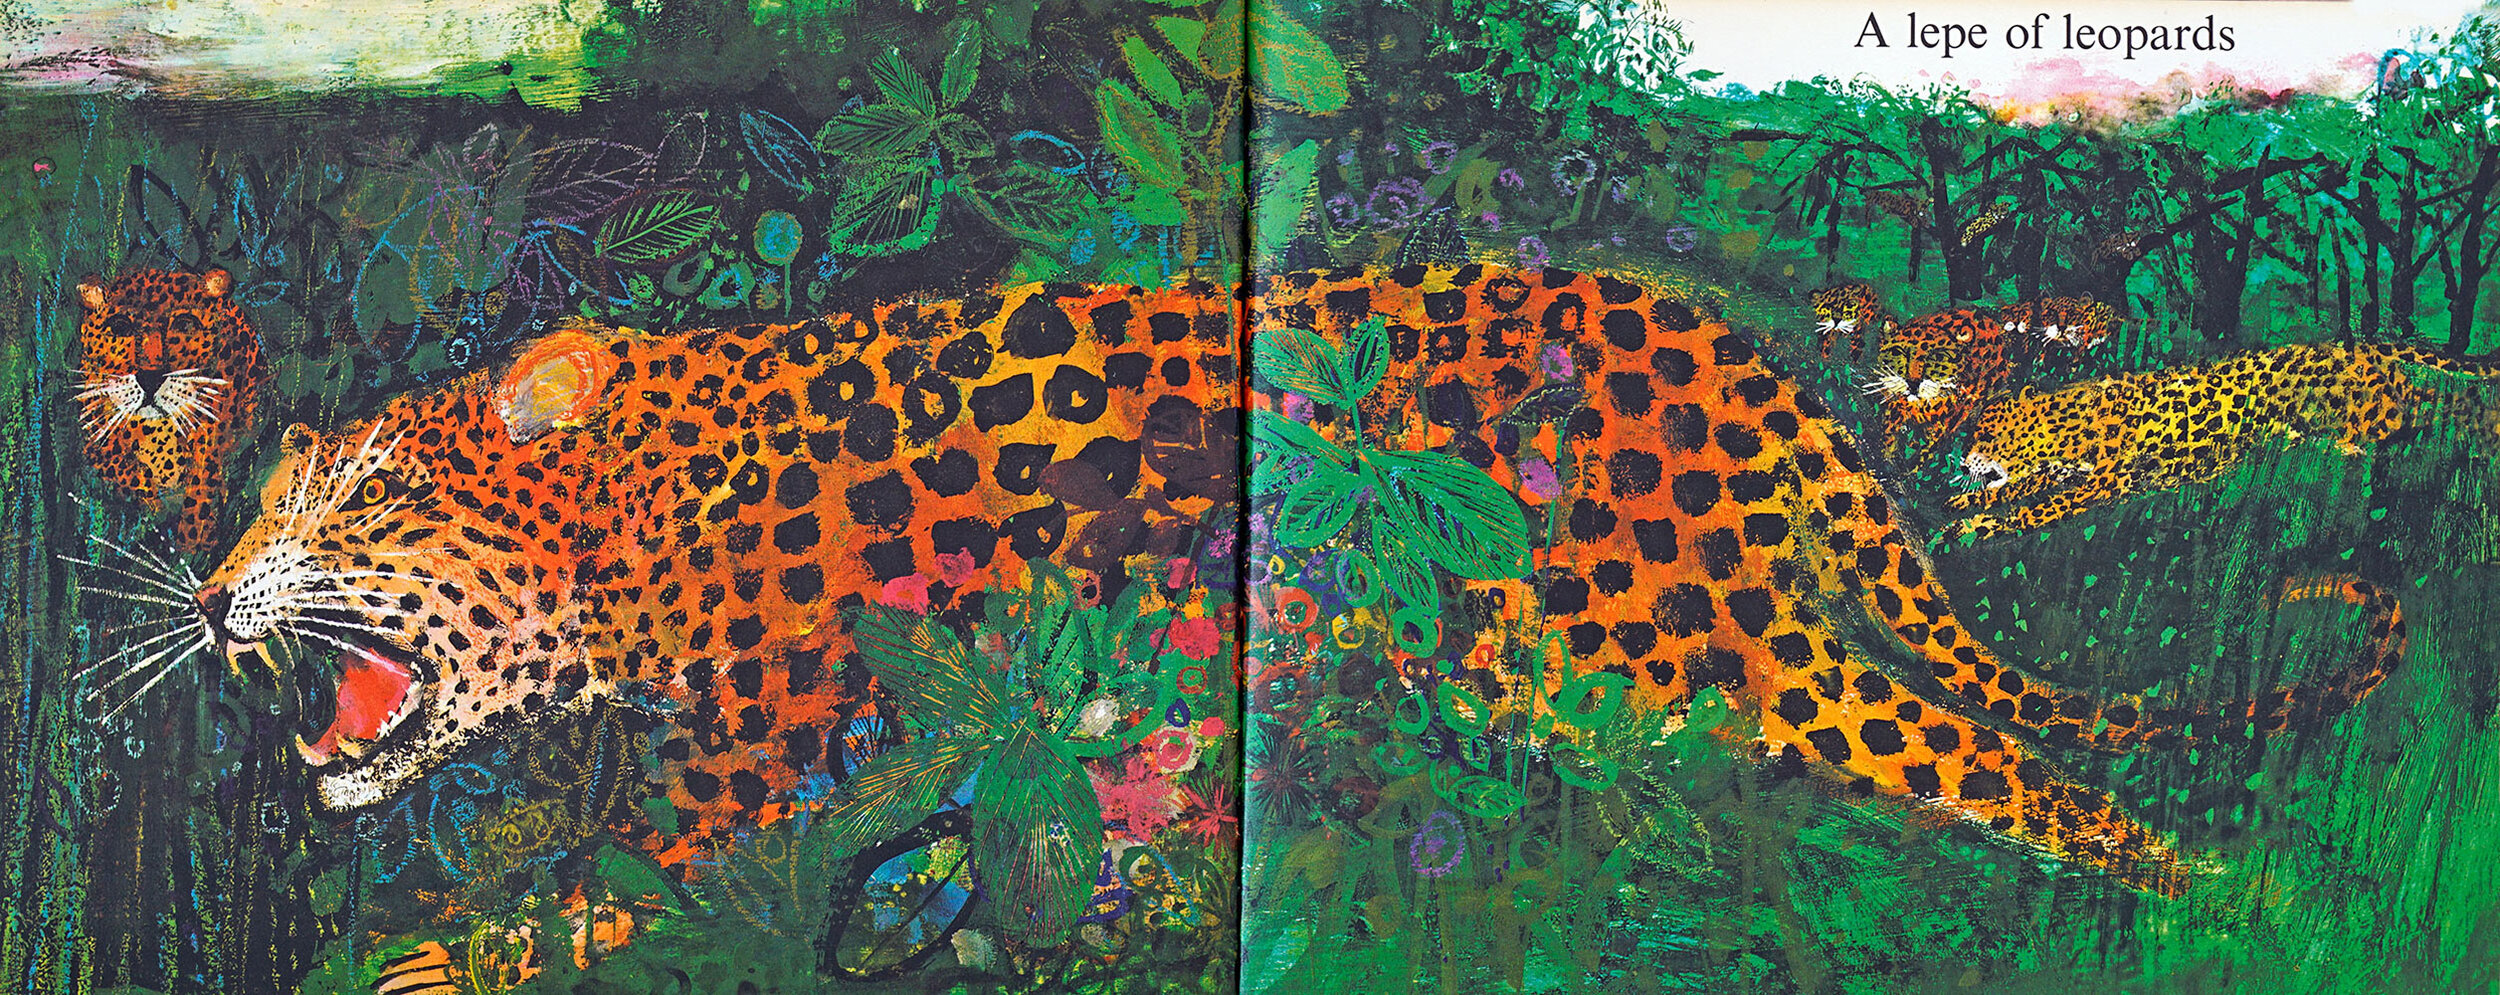 WILD ANIMALS - 1967. Republished in ANIMAL GALLERY - 2008